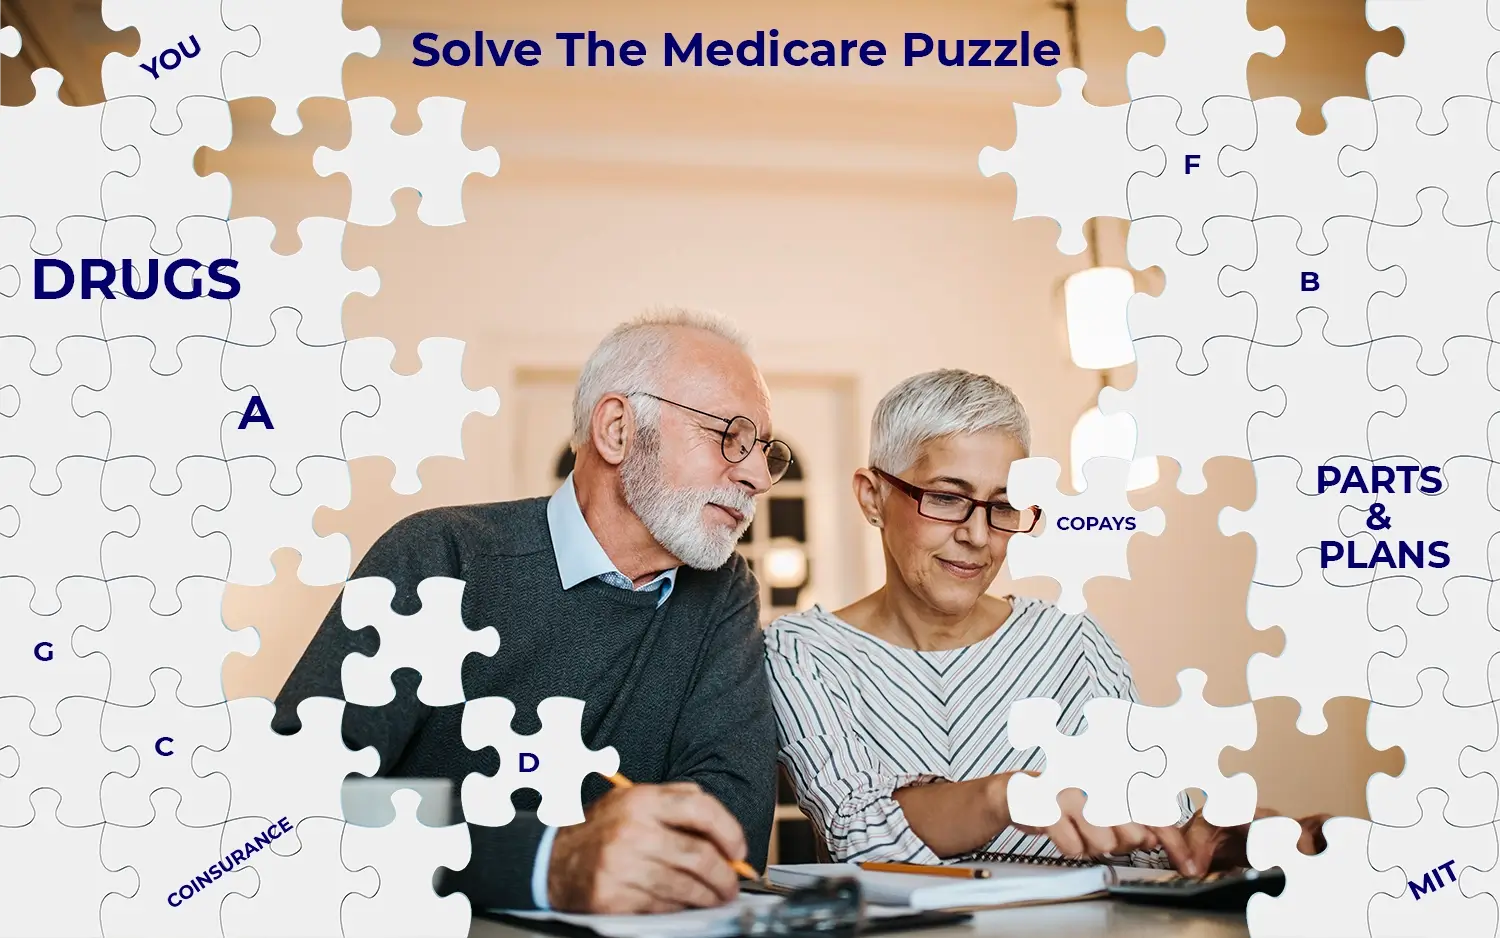 Solve the Medicare Puzzle